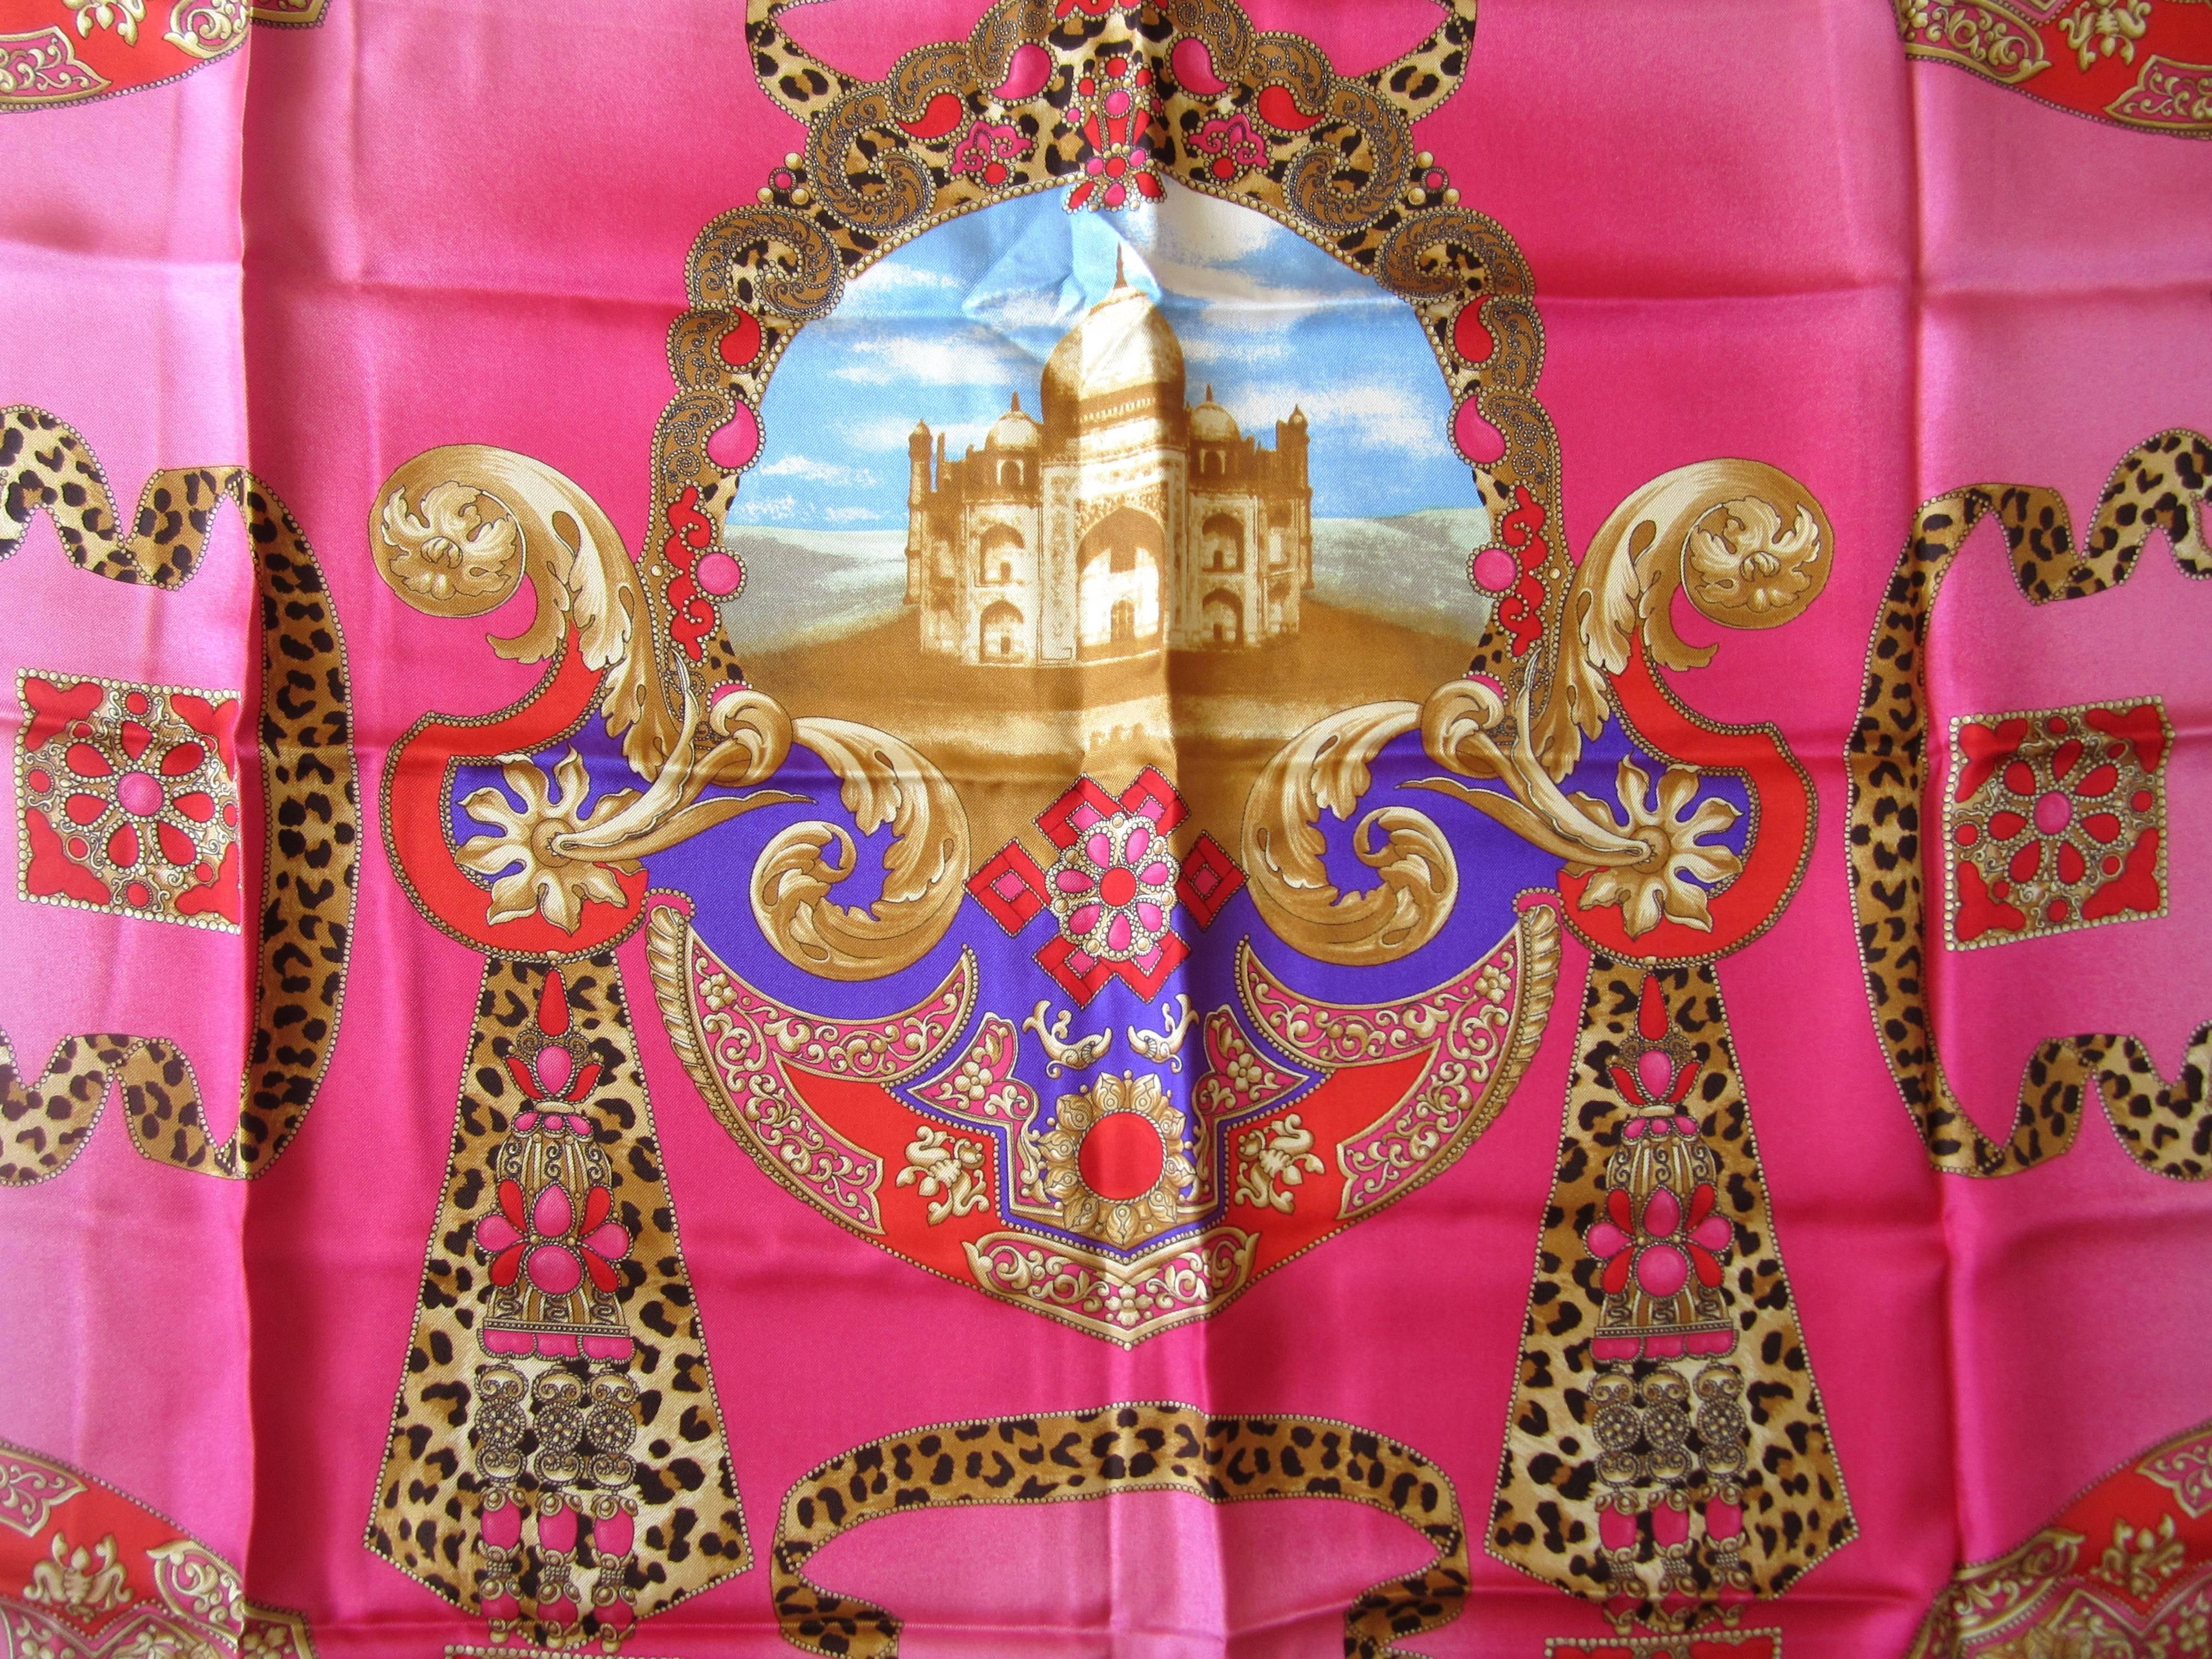 Featuring Taj Mahal with vibrant colors. Vibrant coloring Made in Italy. 34in x 34in. Hand Rolled Silk. This is out of a massive collection of Contemporary designer clothing as well as Hopi, Zuni, Navajo, Southwestern, sterling silver, costume